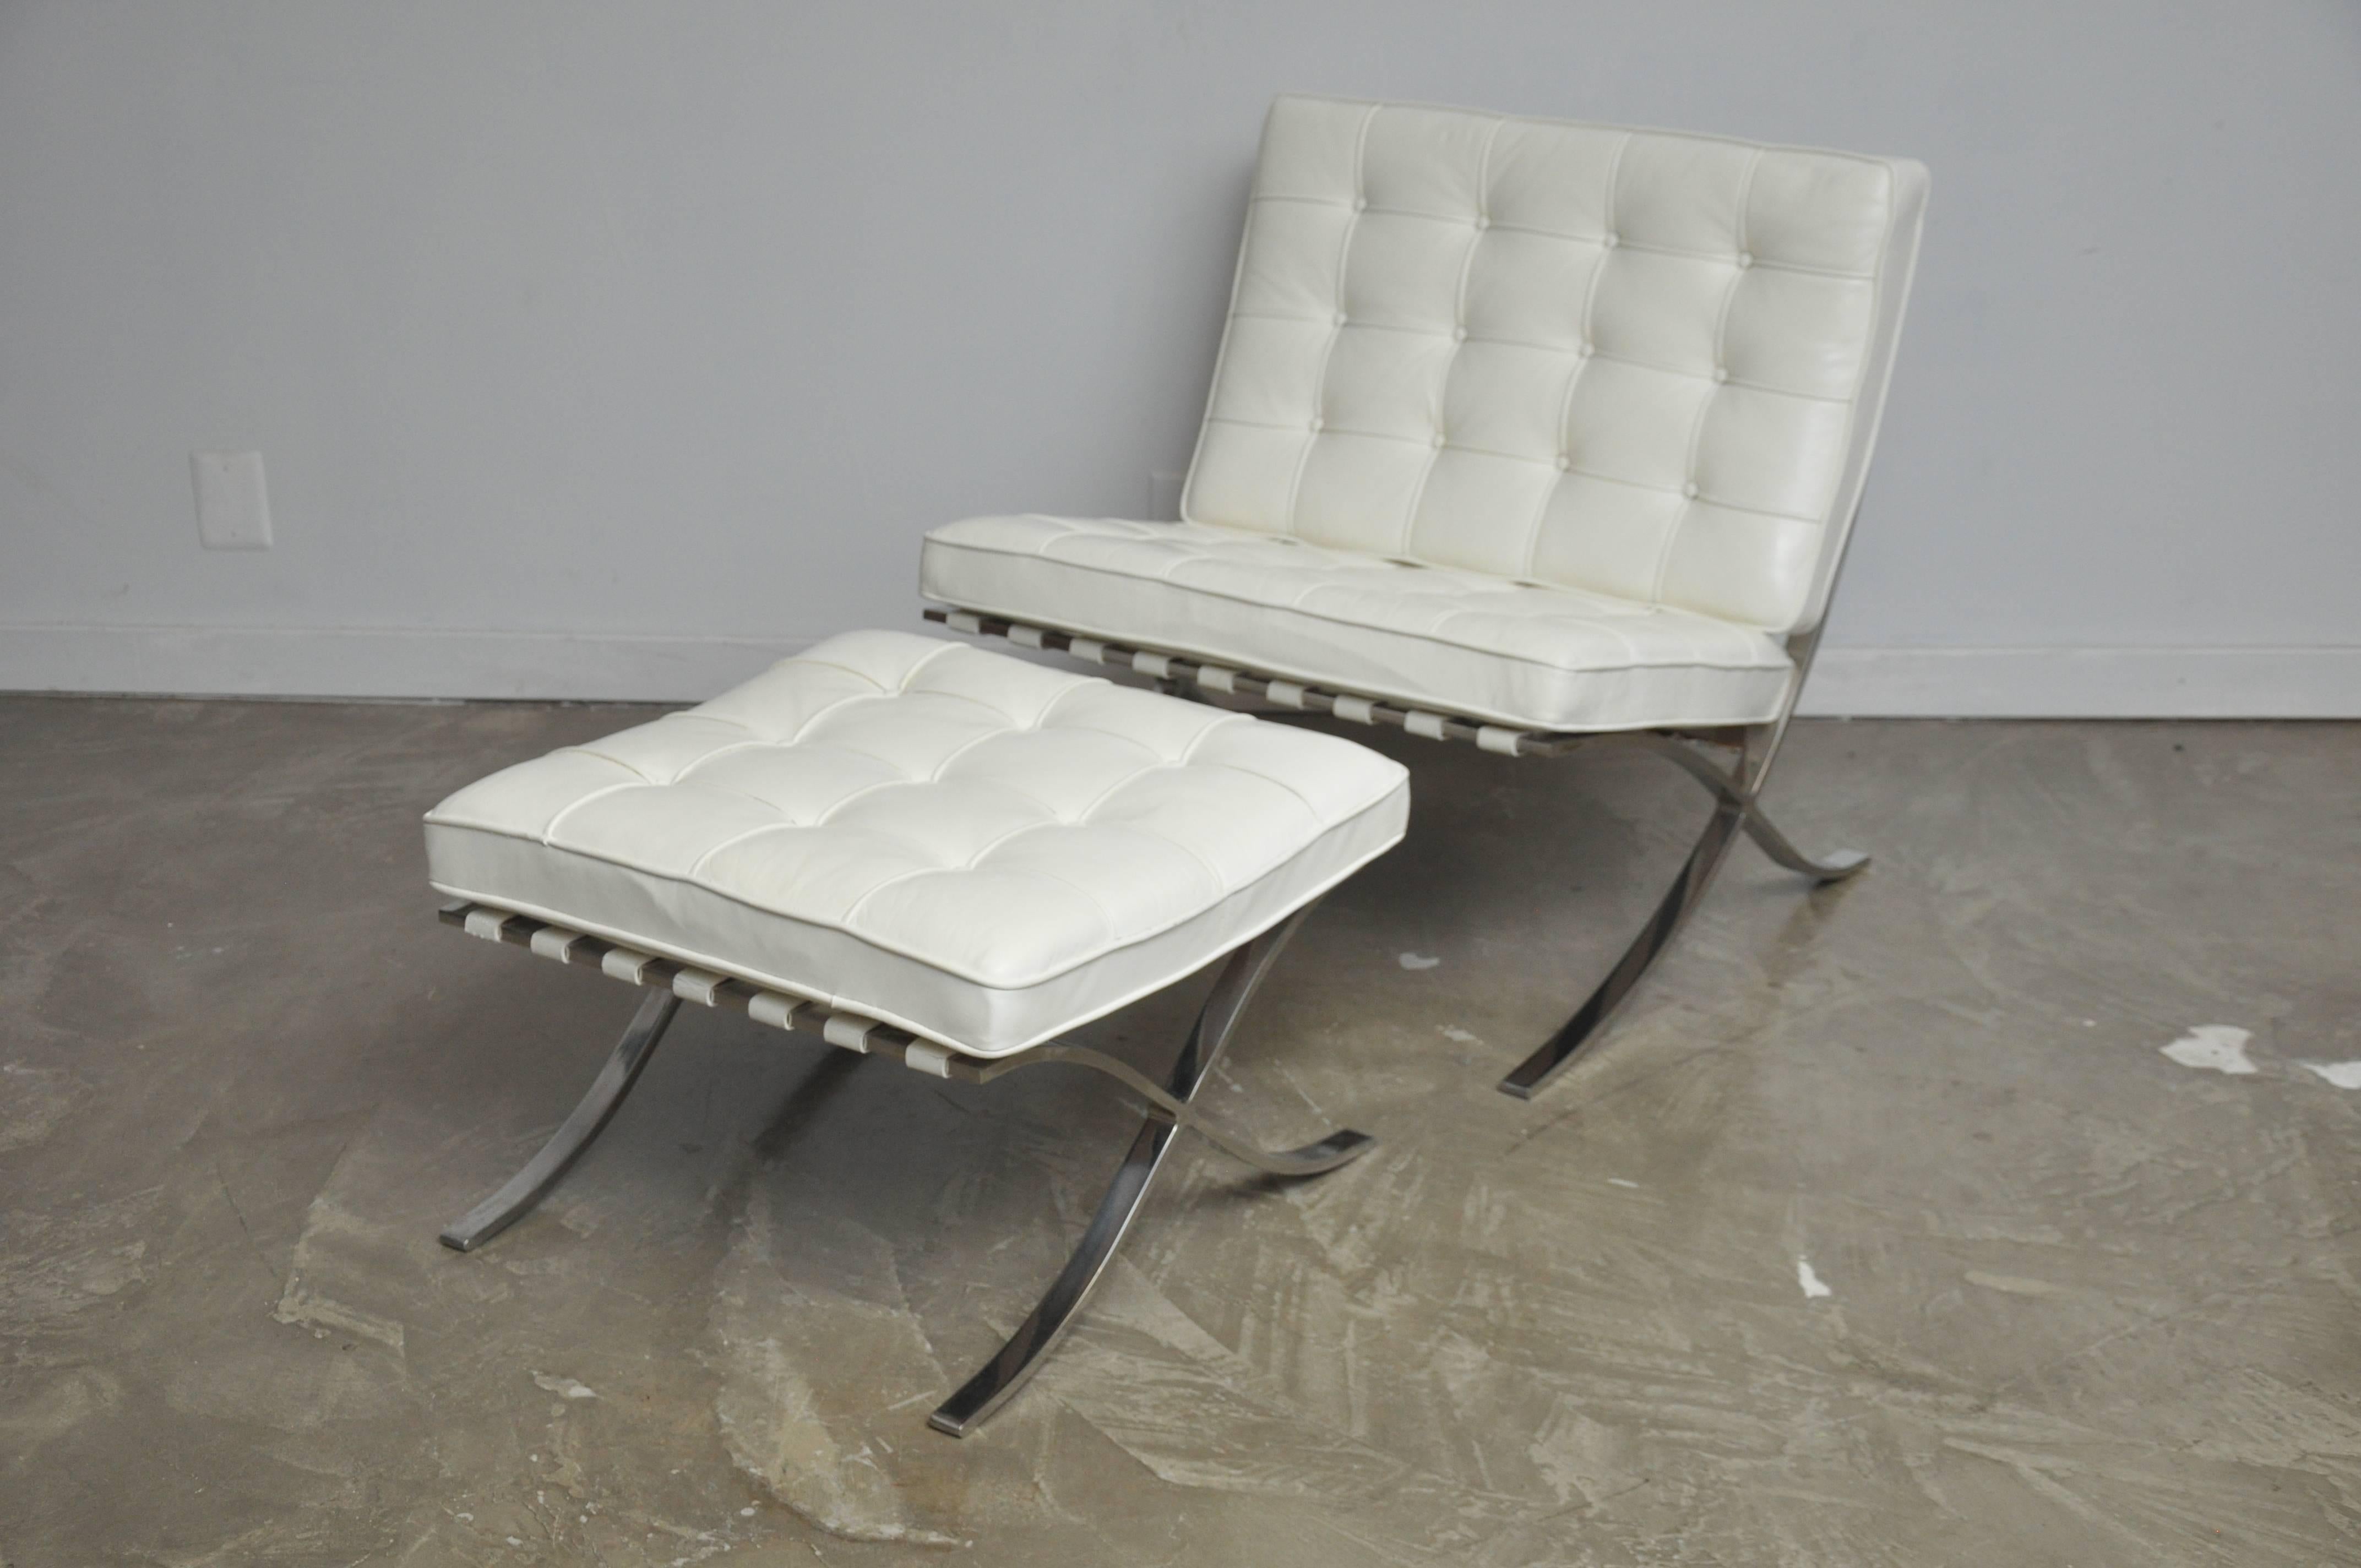 Barcelona chair and ottoman designed by Mies van der Rohe for Knoll, vintage chair, circa 1970s. Original white leather looks to have been re-died white again to maintain that it’s white tone. Set is marked Knoll.